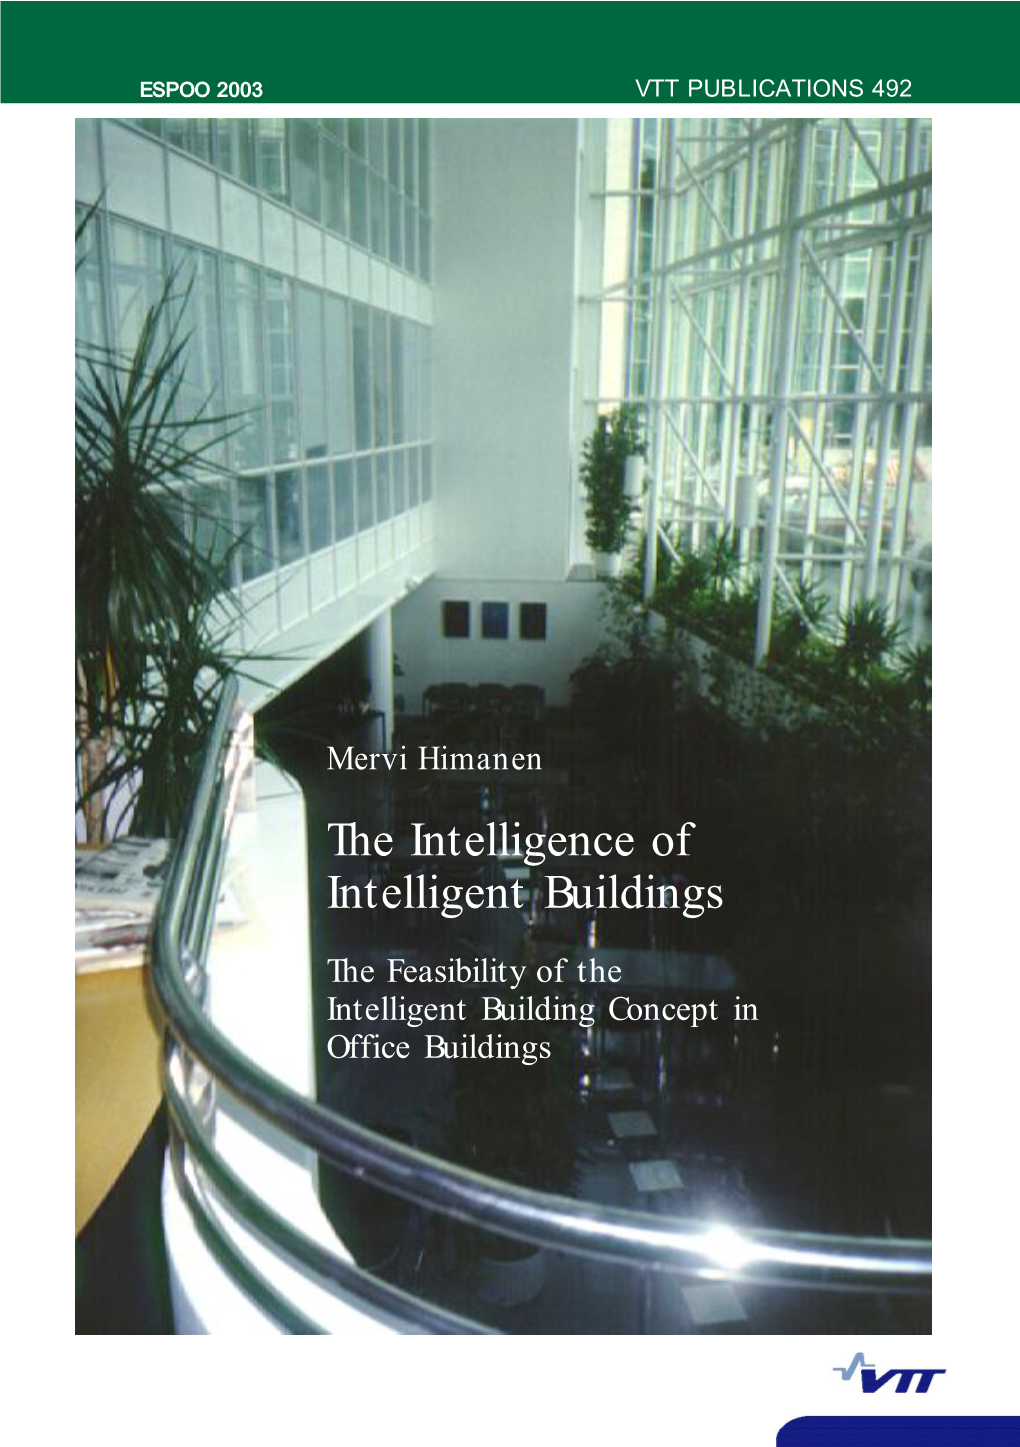 The Intelligence of Intelligent Buildings the of Feasibility the Intelligent Building Concept in Office Buildings ESPOO 2003